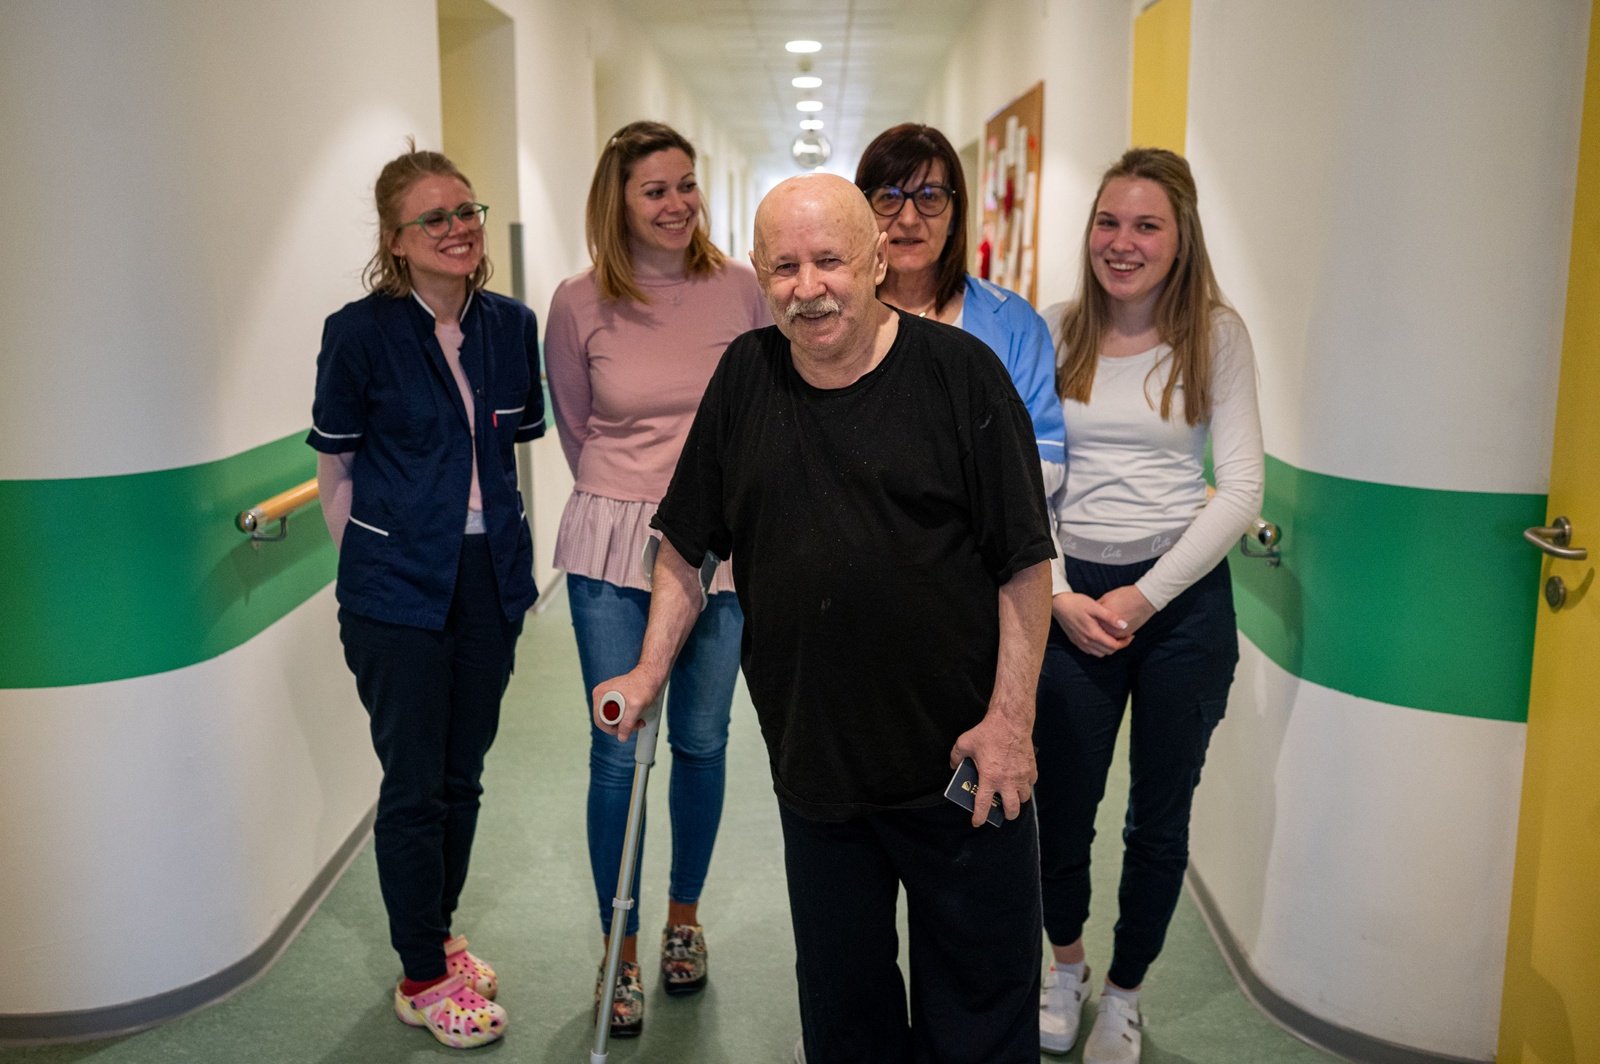 Bego, middle, is surrounded by caregivers at the Home for Older People in Glina, Croatia, reconstructed through the Regional Housing Programme.